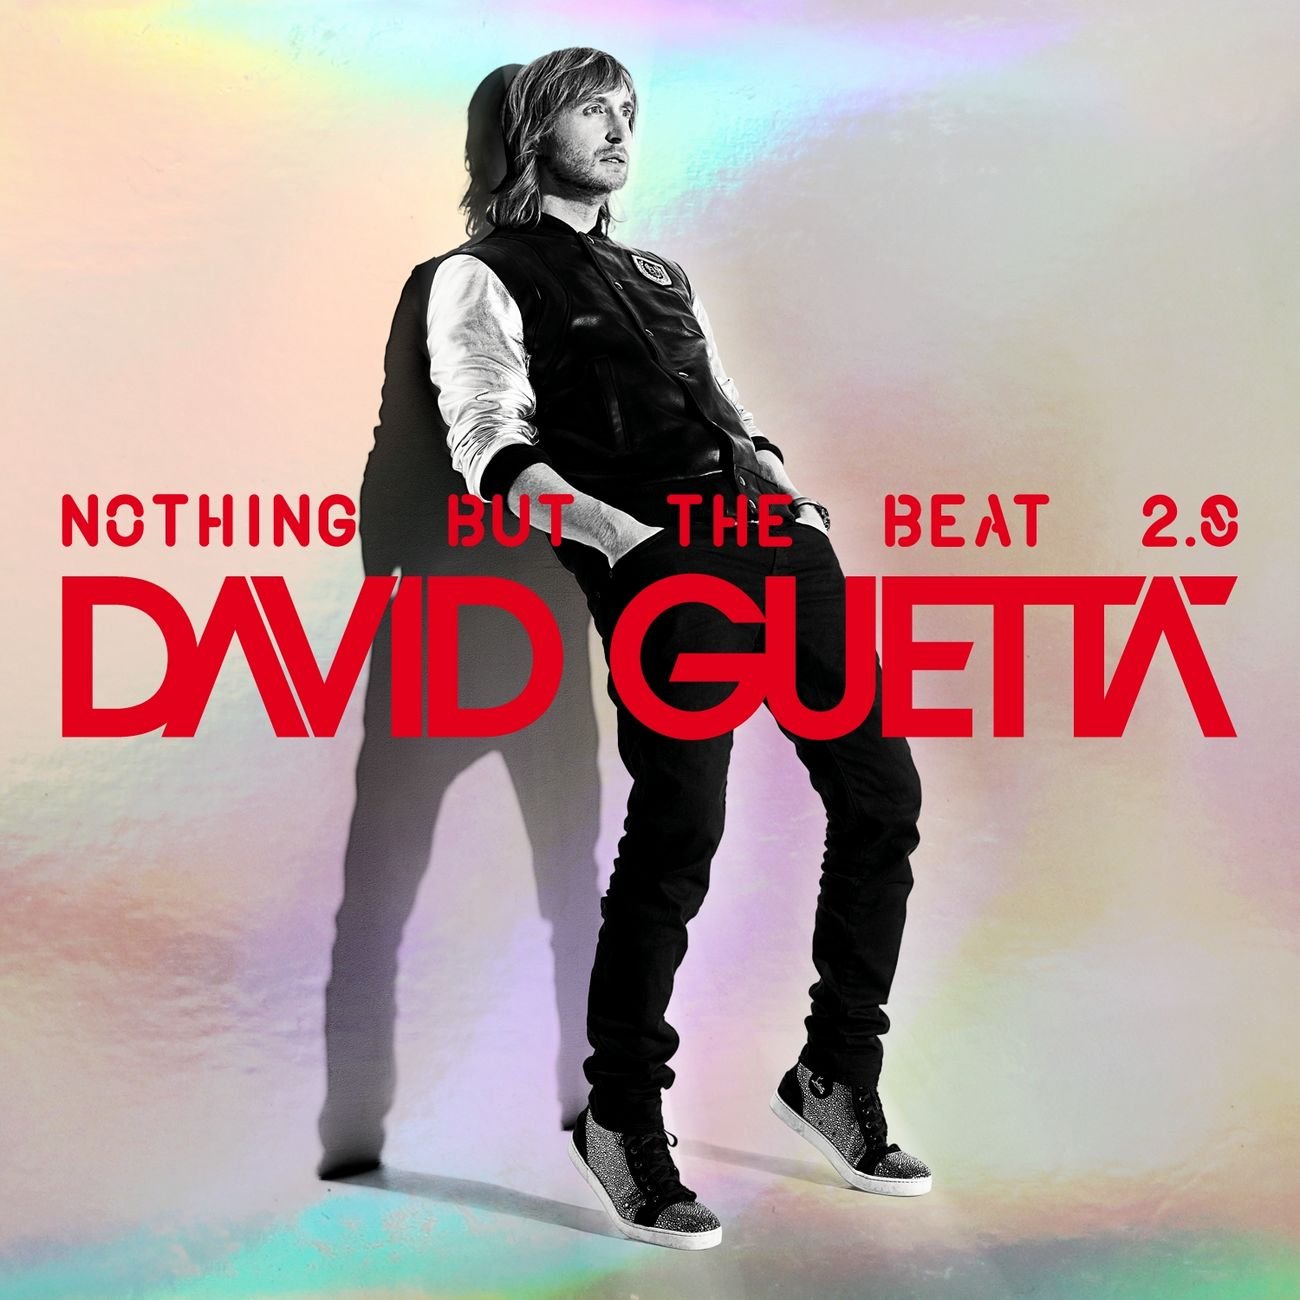 Nothing but the Beat 2.0 — David Guetta | Last.fm